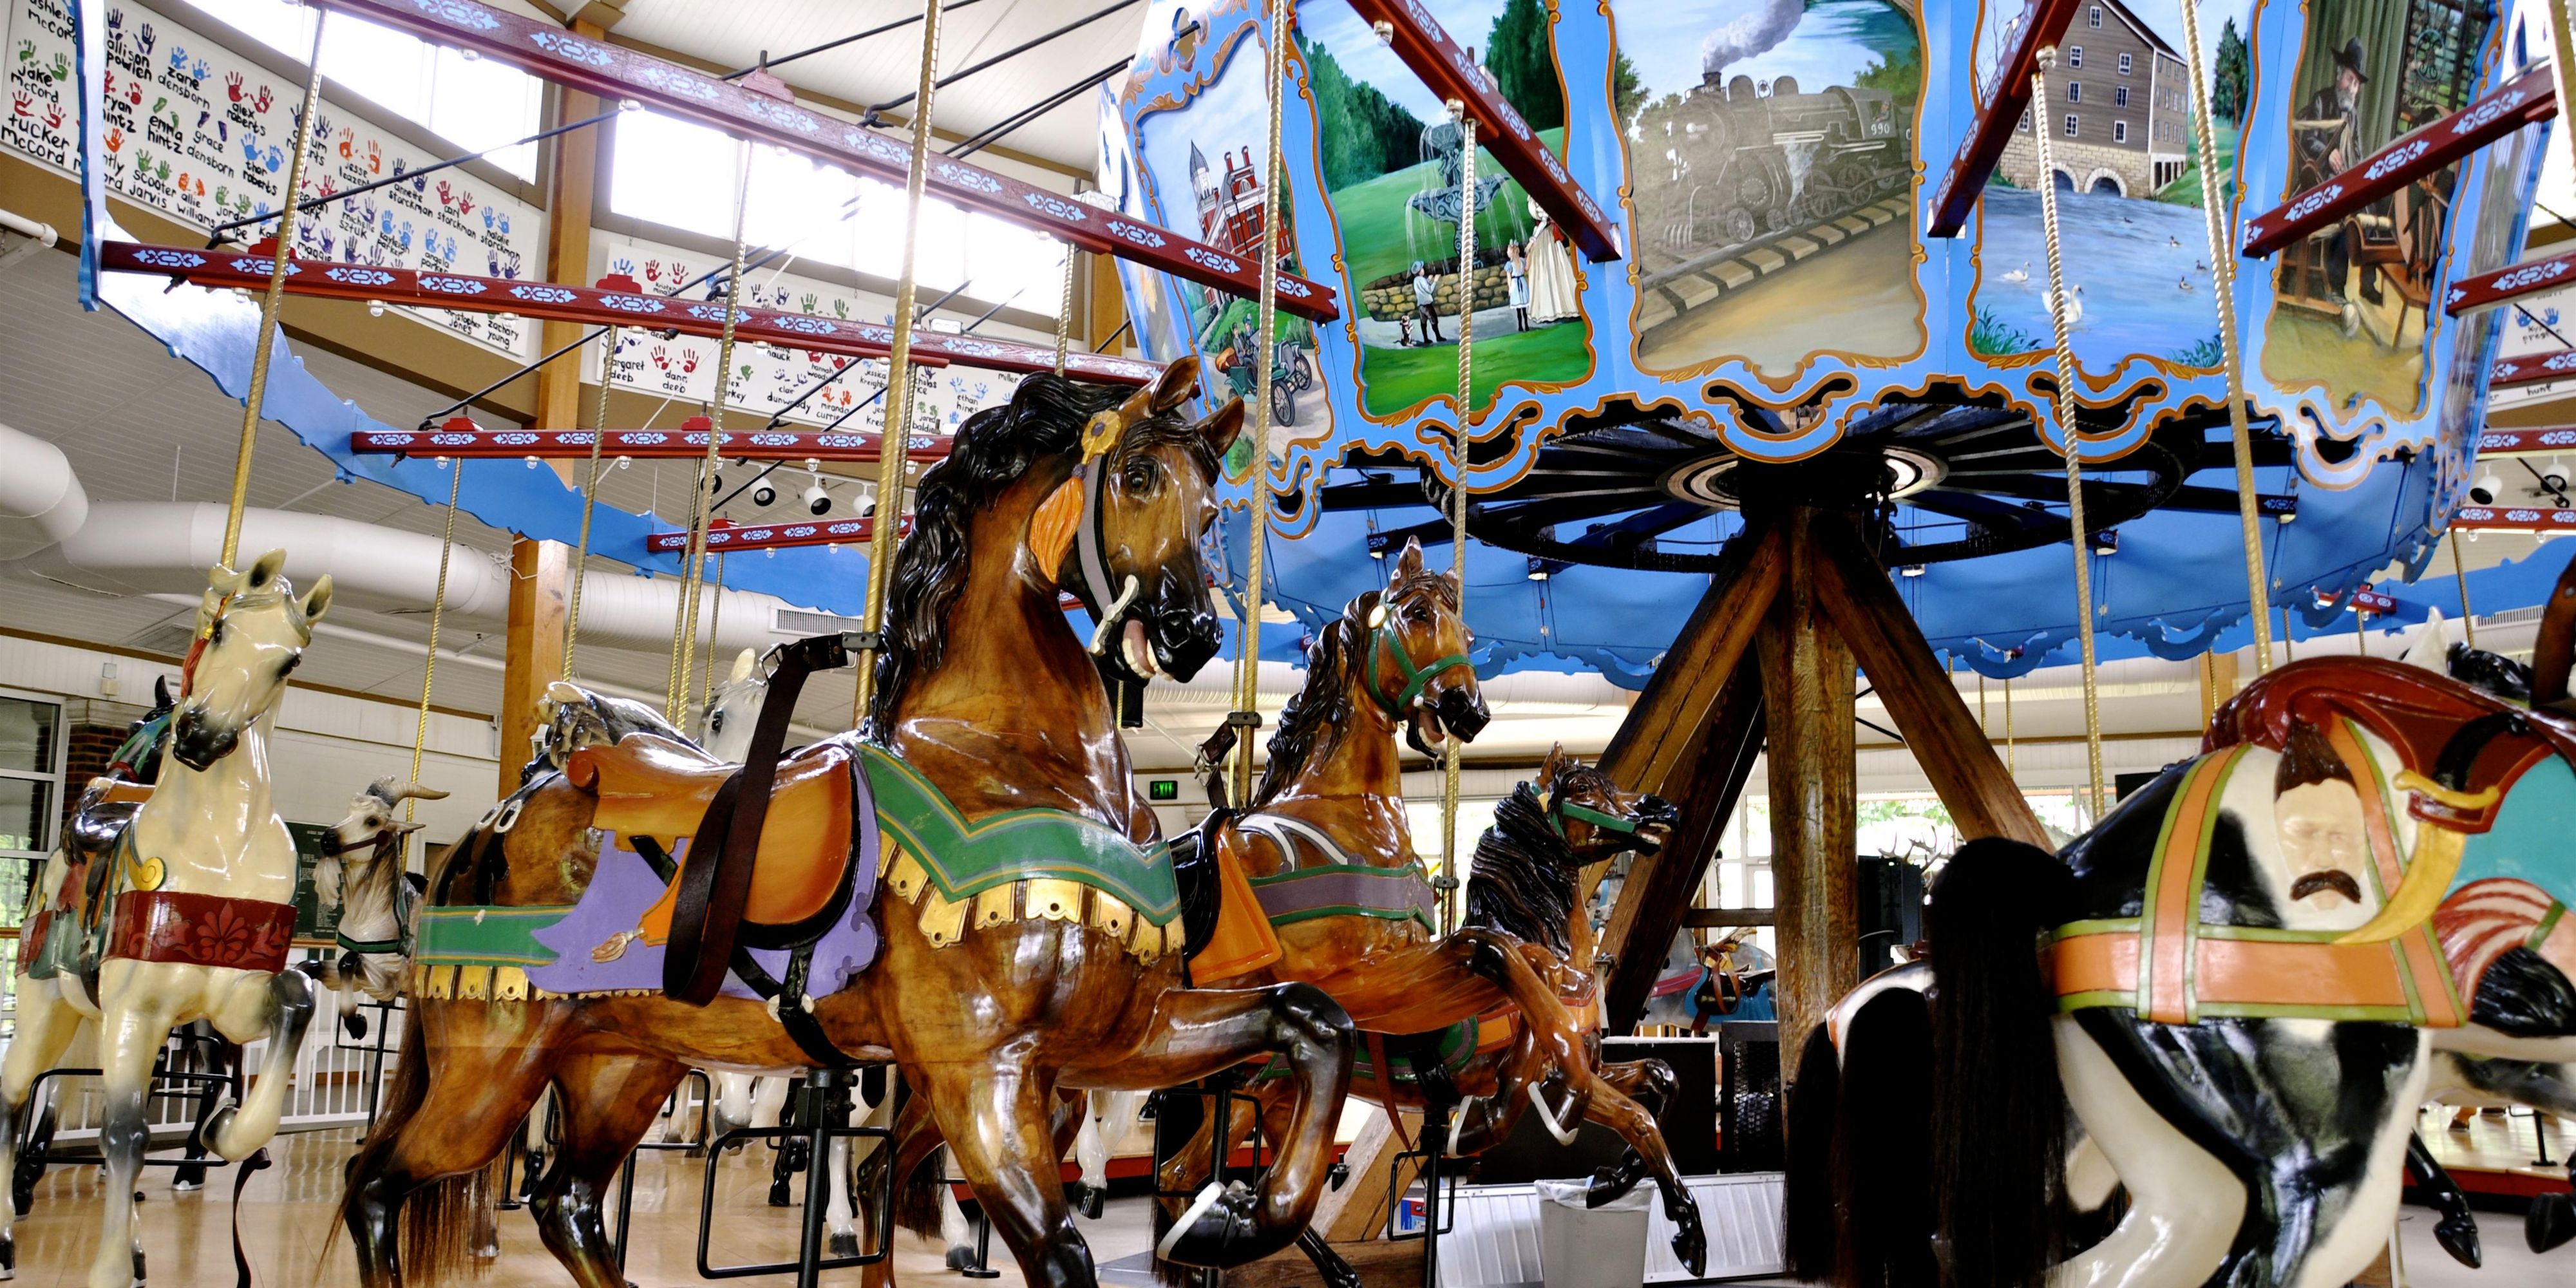 The Dentzel Carousel is a Historical Hand-Carved beauty everyone should visit for a ride.